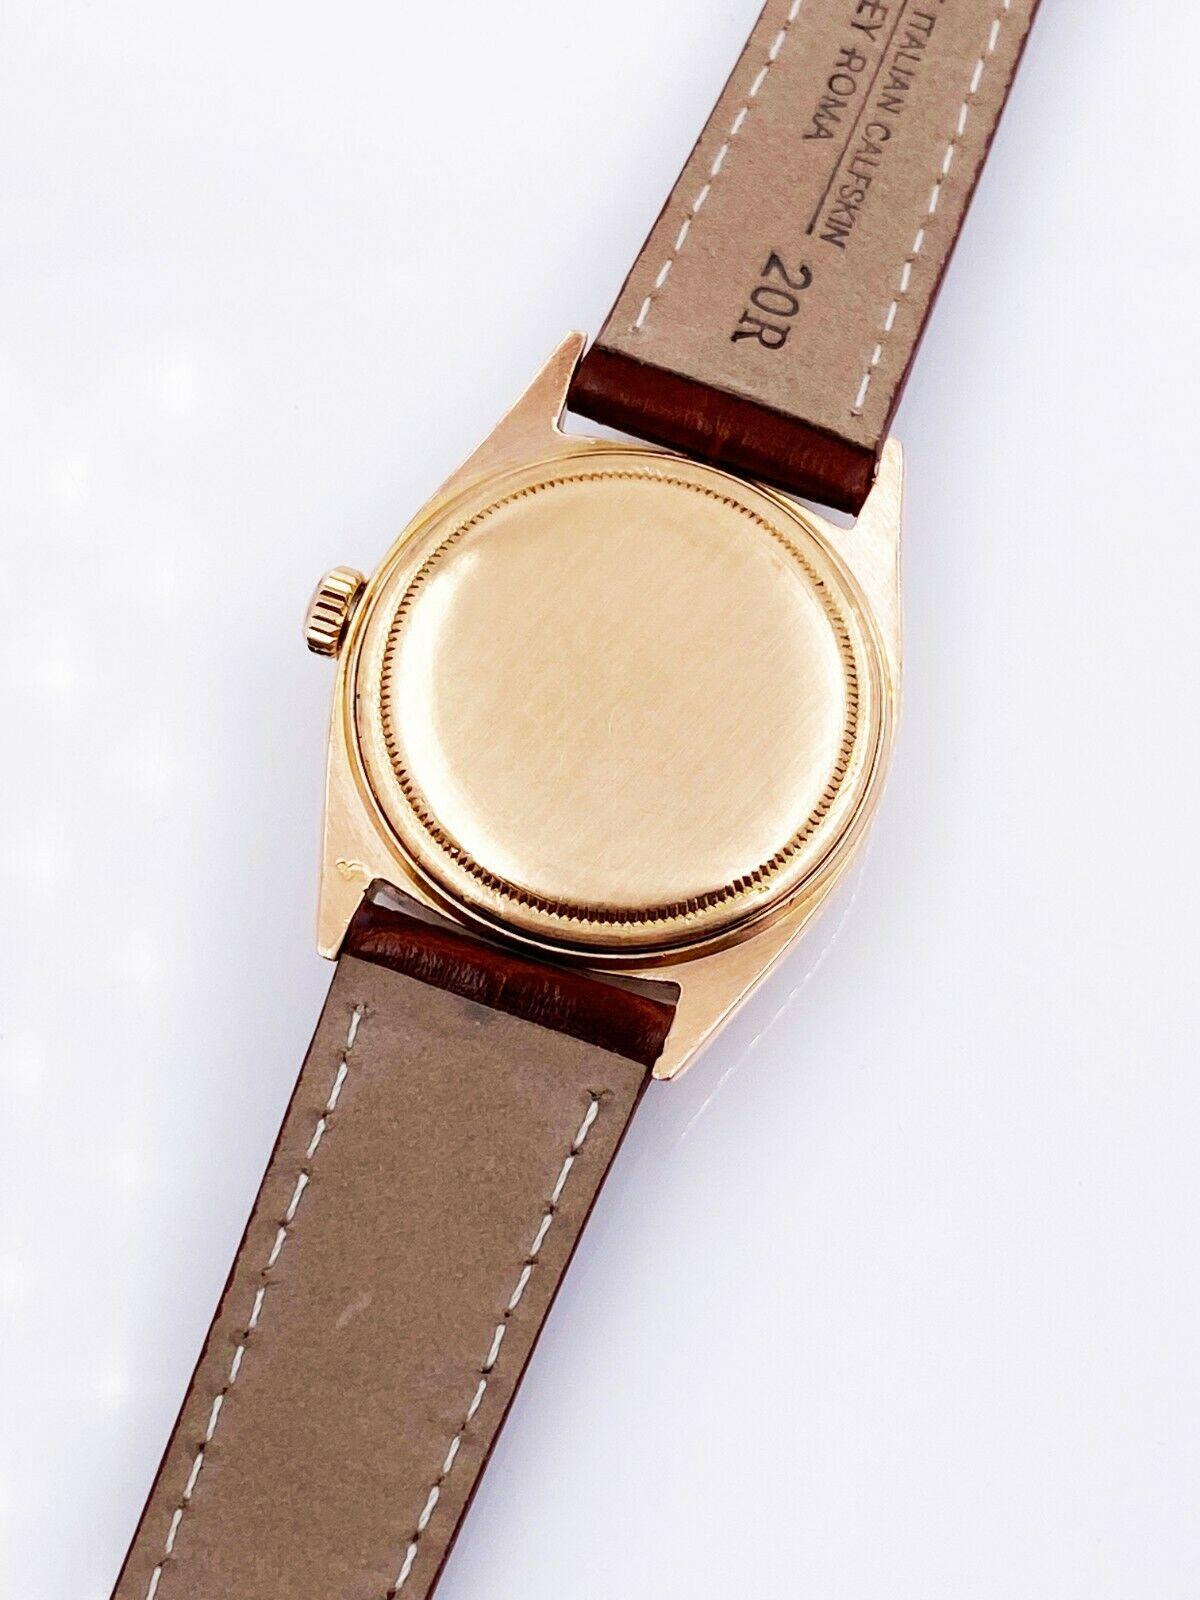 Style Number: 1803

 

Serial: 2154***

 

Model: President Day Date

 

Case Material: 18K Rose Gold 

 

Band: Custom Leather, Brown 

 

Bezel: 18K Rose Gold 

 

Dial: Custom Chocolate Diamond 

 

Face: Acrylic 

 

Case Size: 36mm

